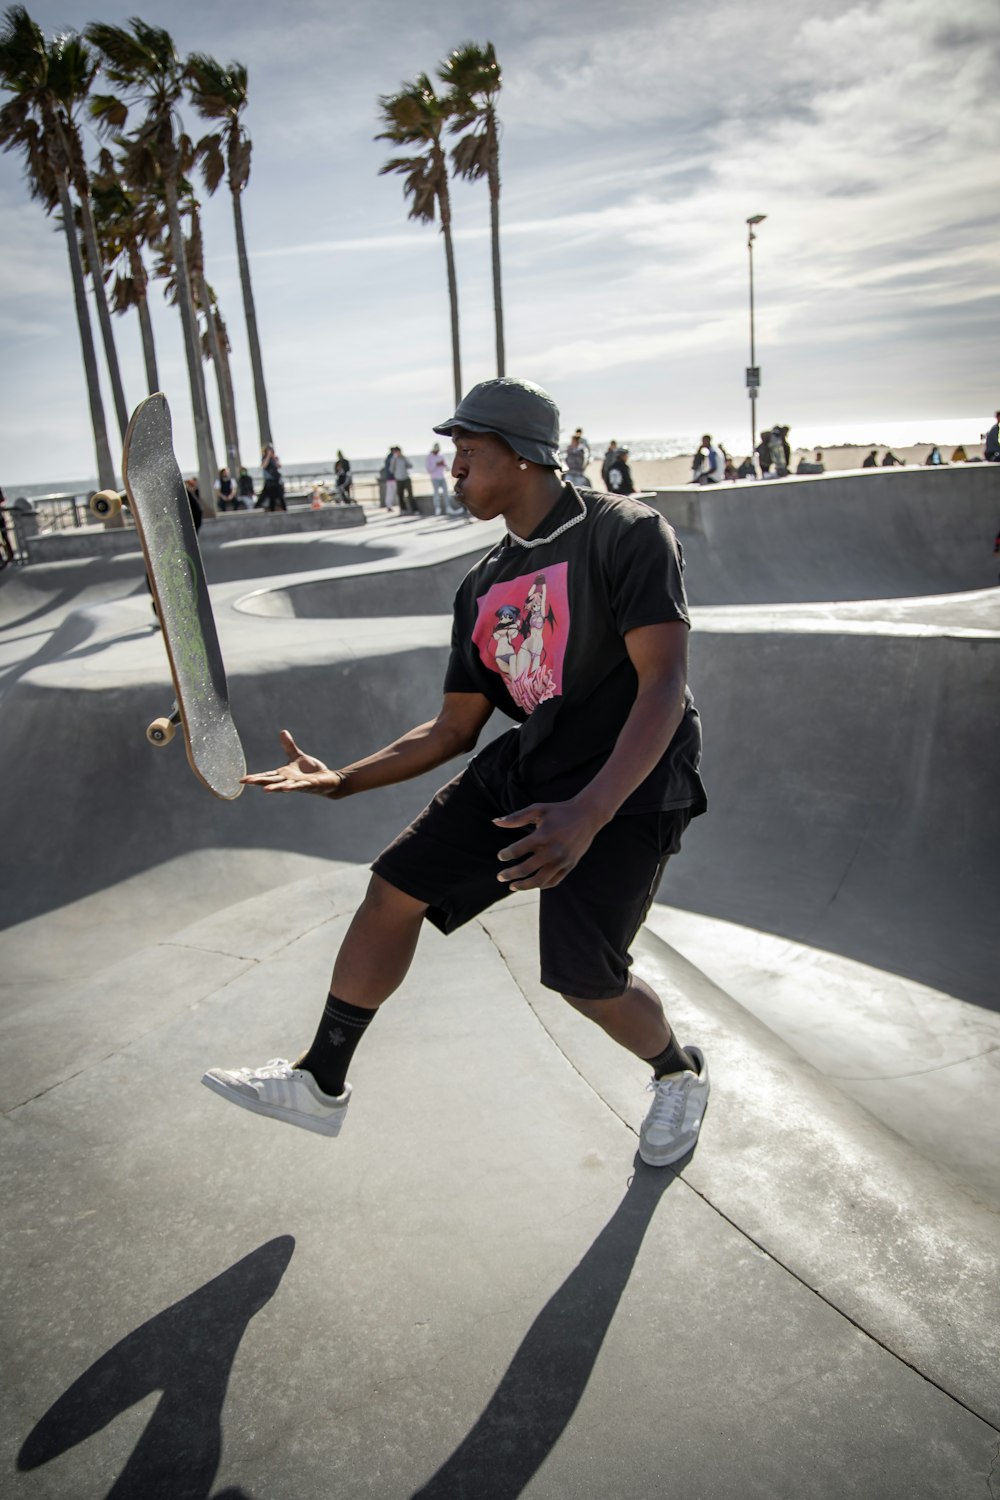 man in blue crew neck t-shirt and black shorts sitting on skateboard during daytime